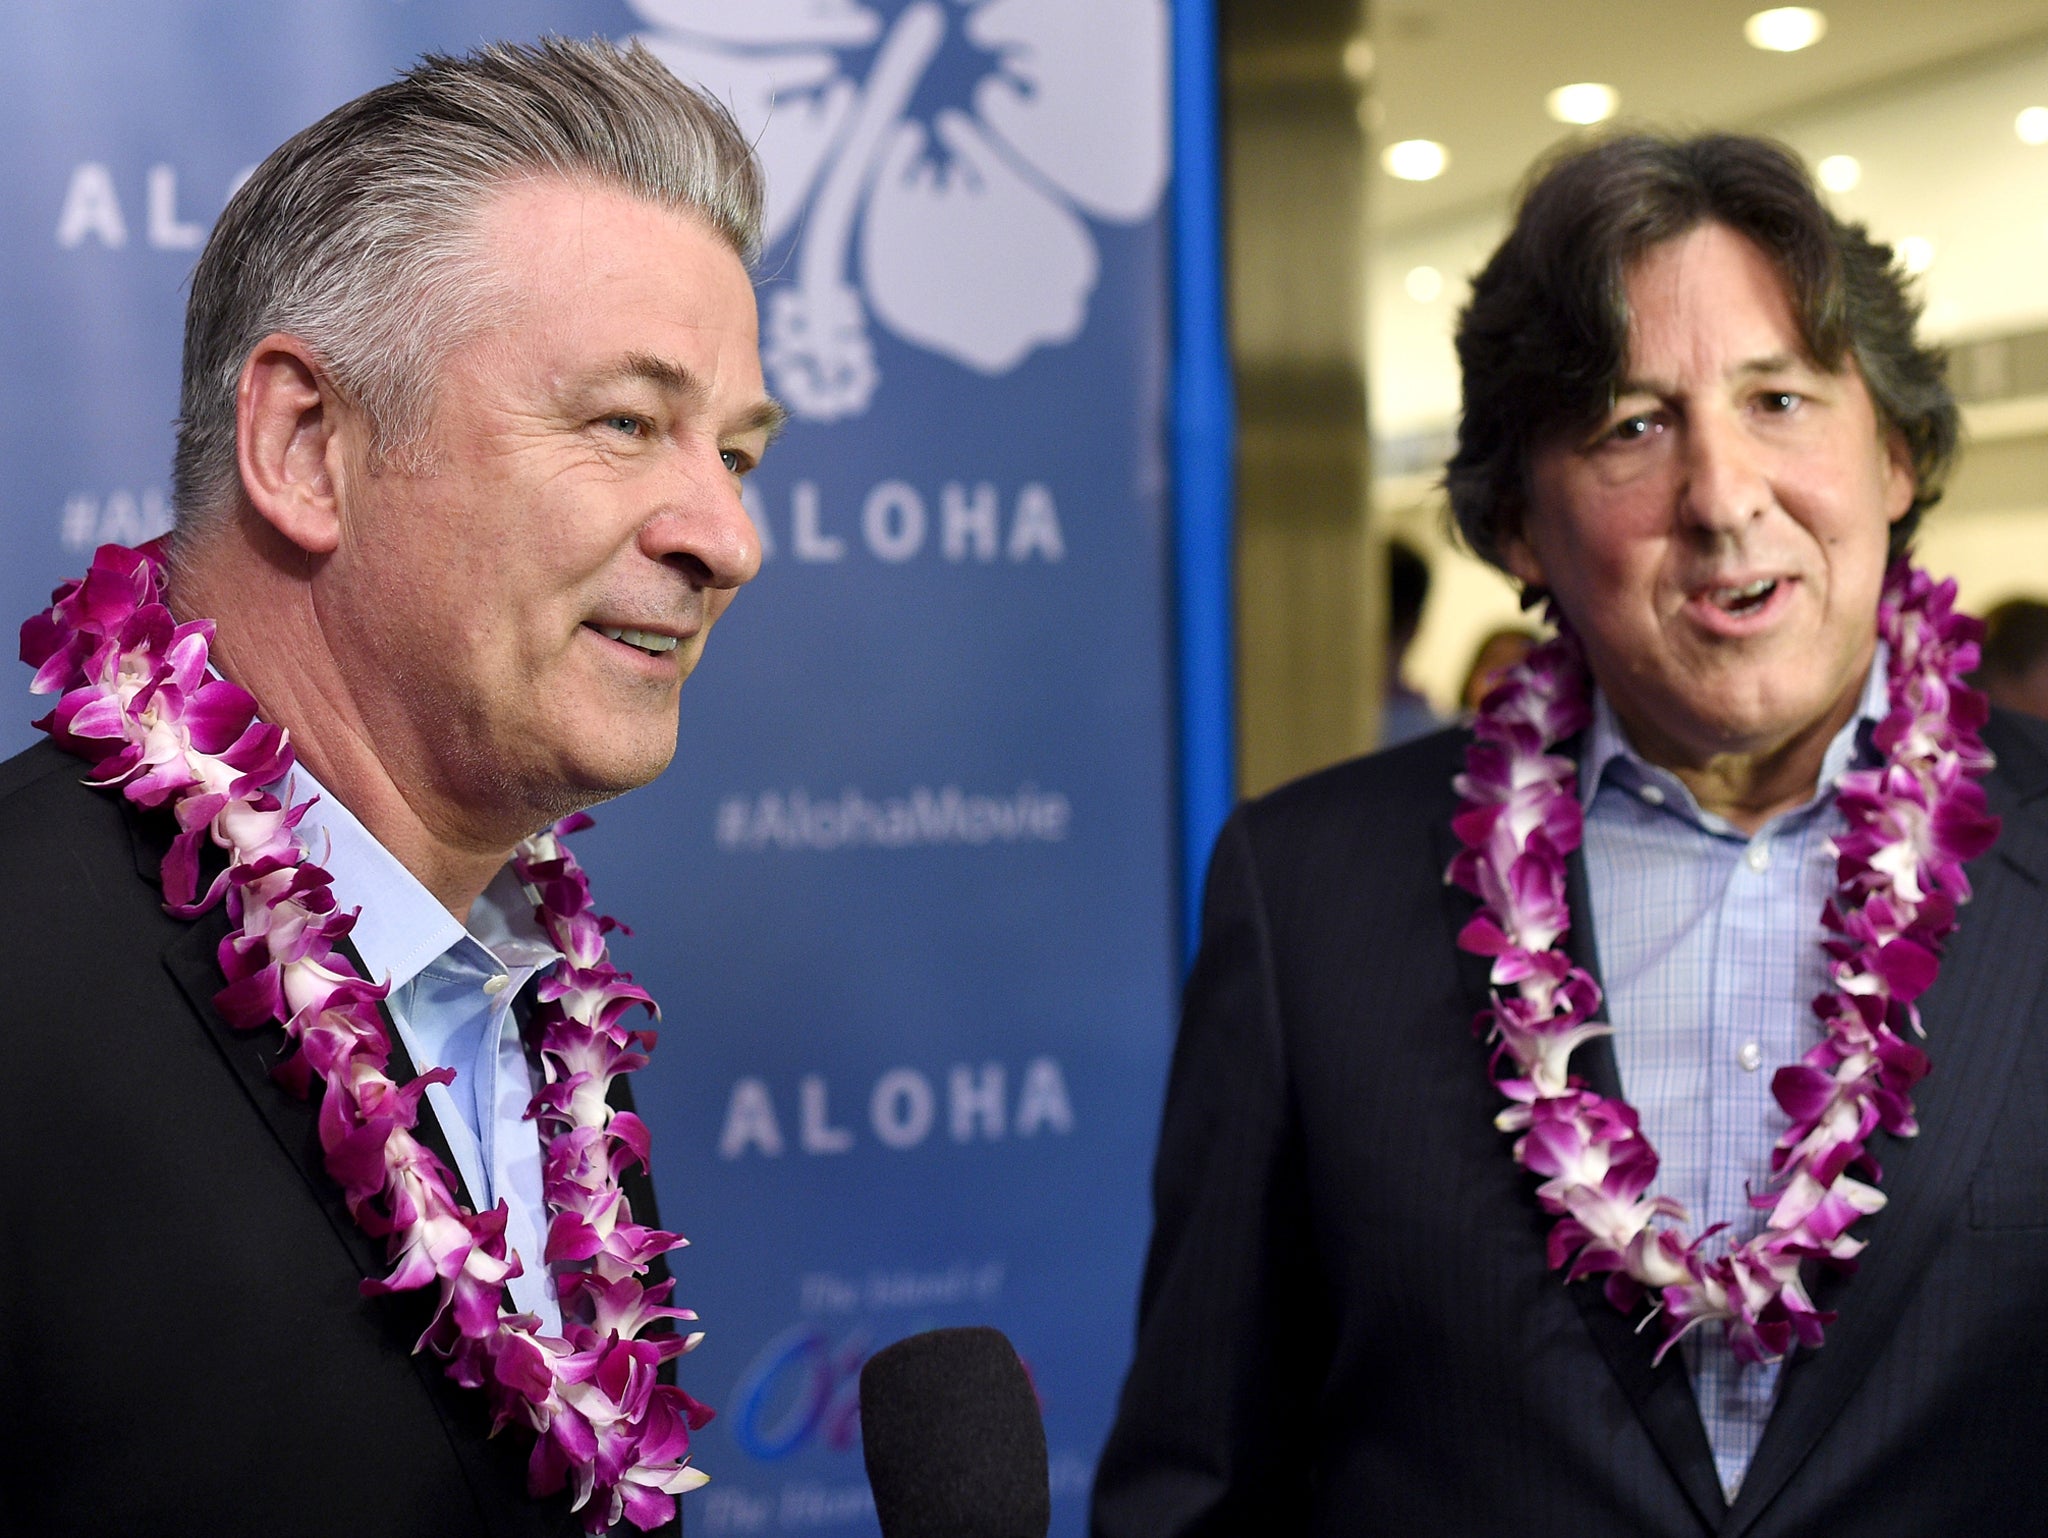 Cameron Crowe and Alec Baldwin wearing floral necklaces at the Aloha premiere